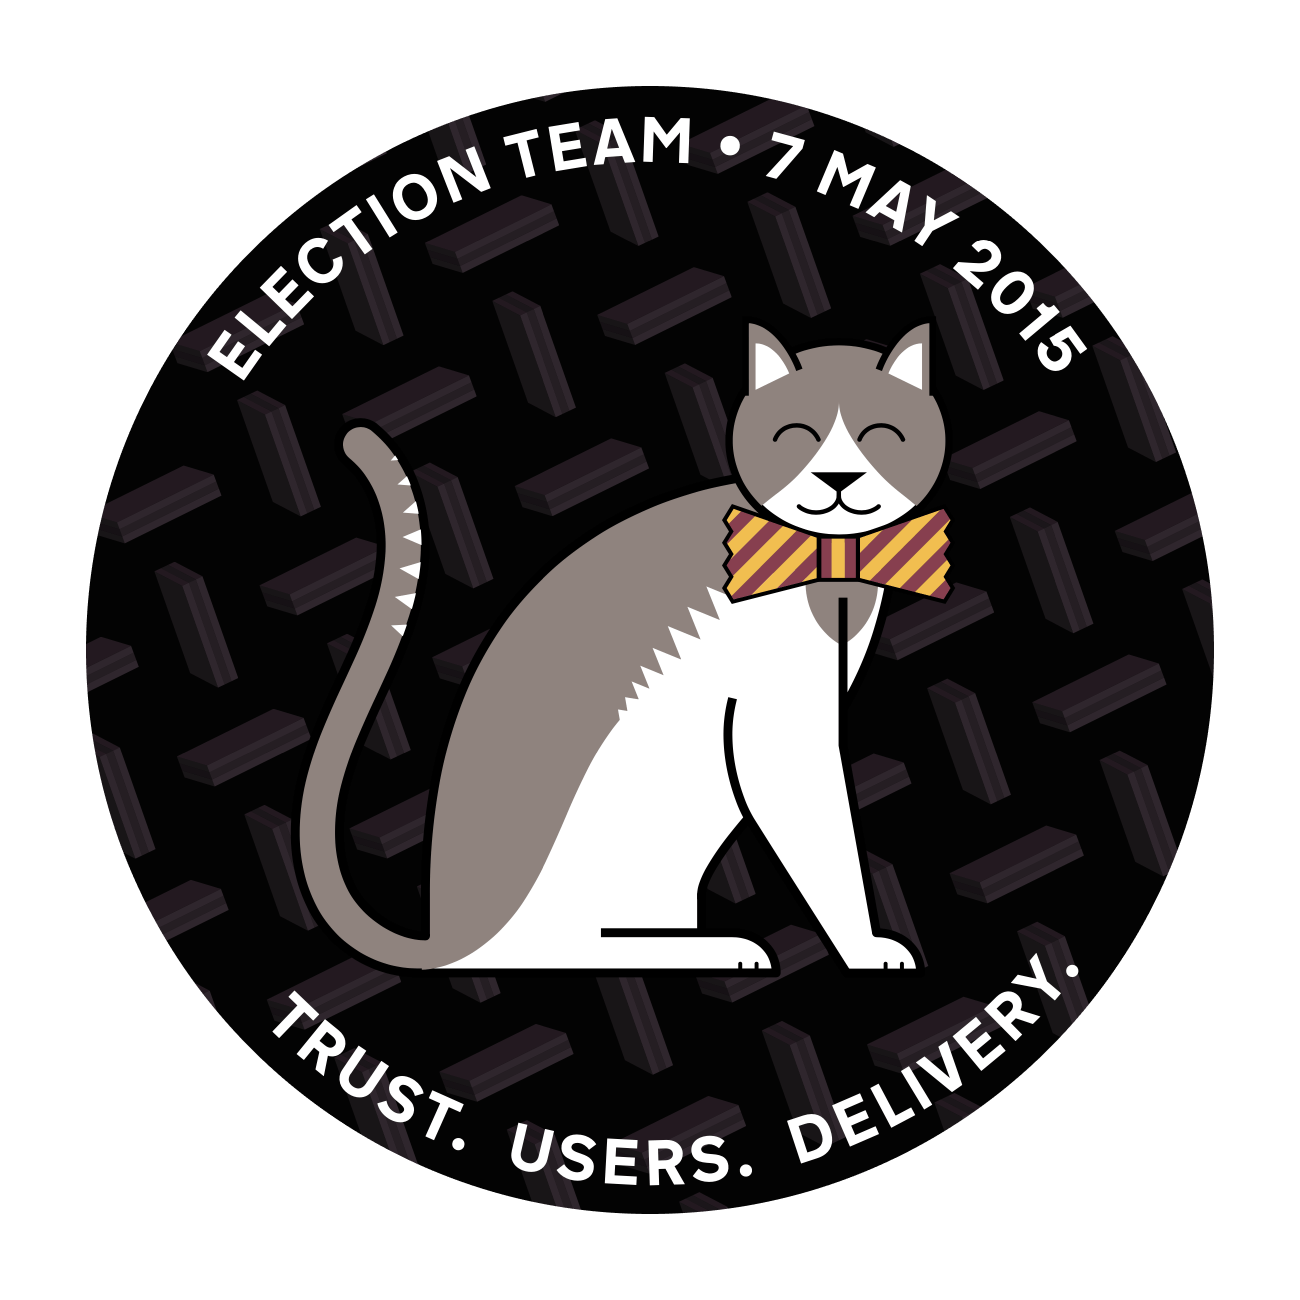 An illustrated mission patch for the Elections Team, showing Larry the cat from 10 Downing St. on a dark background